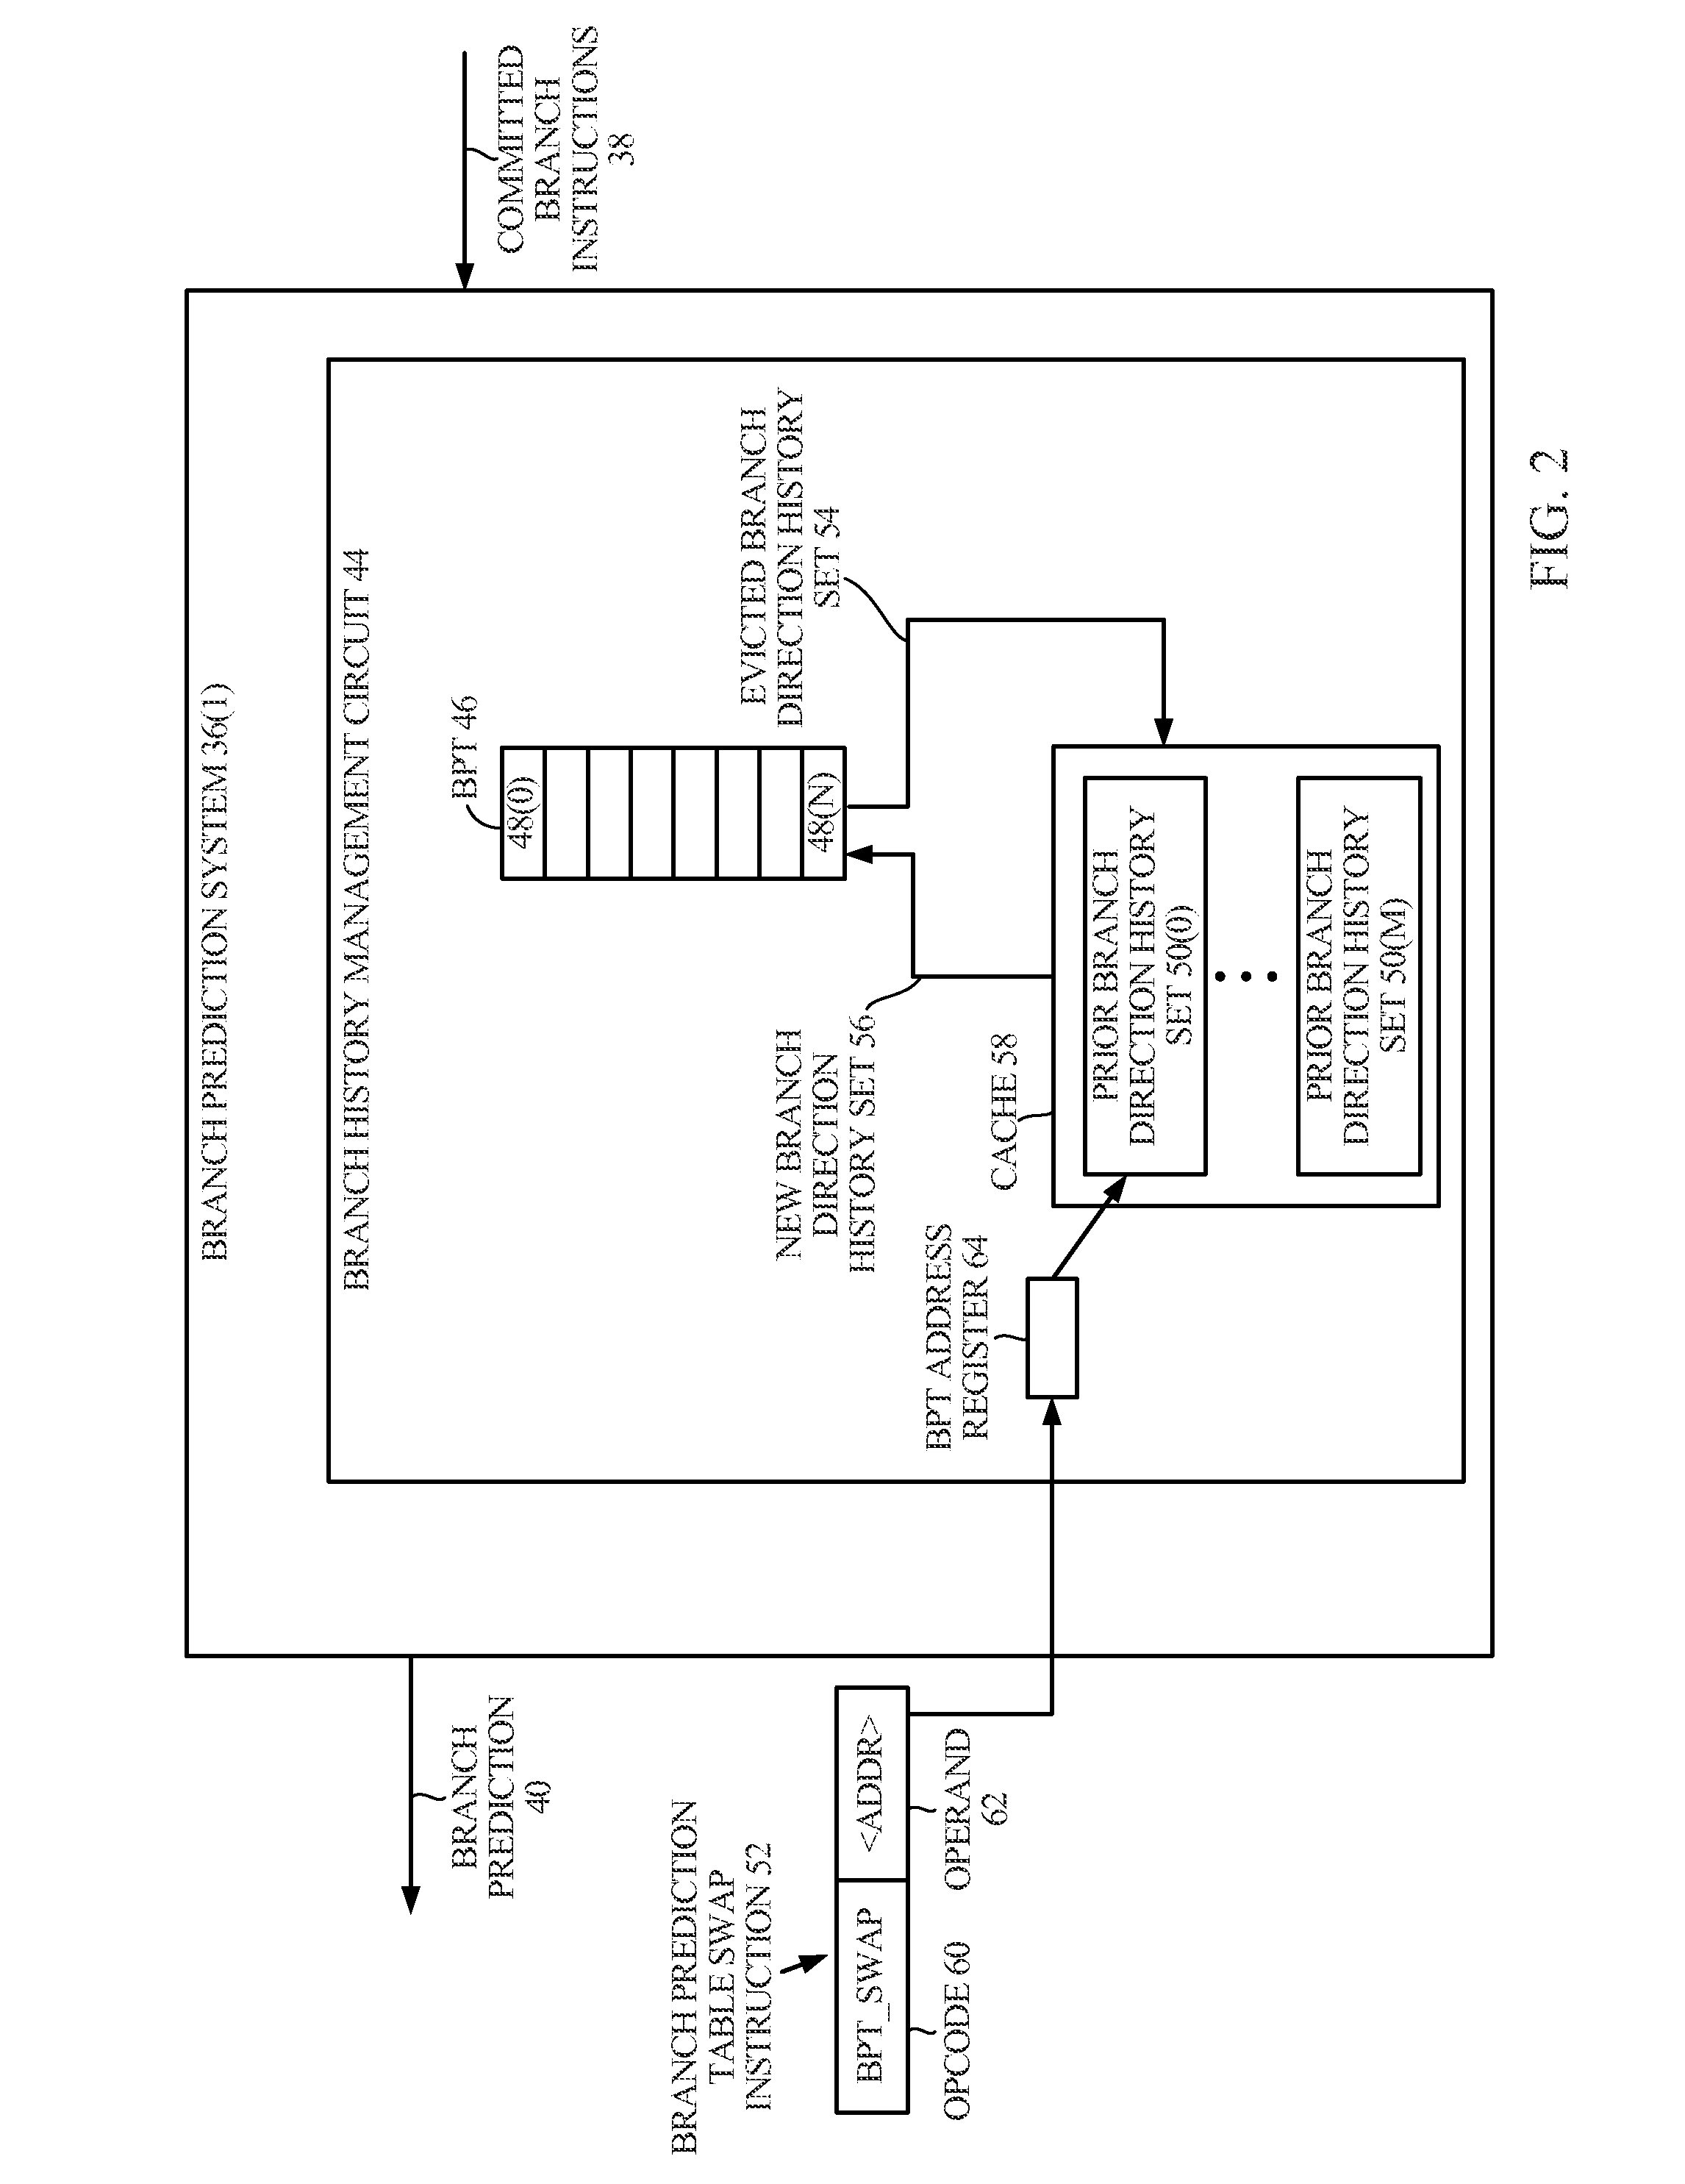 Swapping Branch Direction History(ies) in Response to a Branch Prediction Table Swap Instruction(s), and Related Systems and Methods